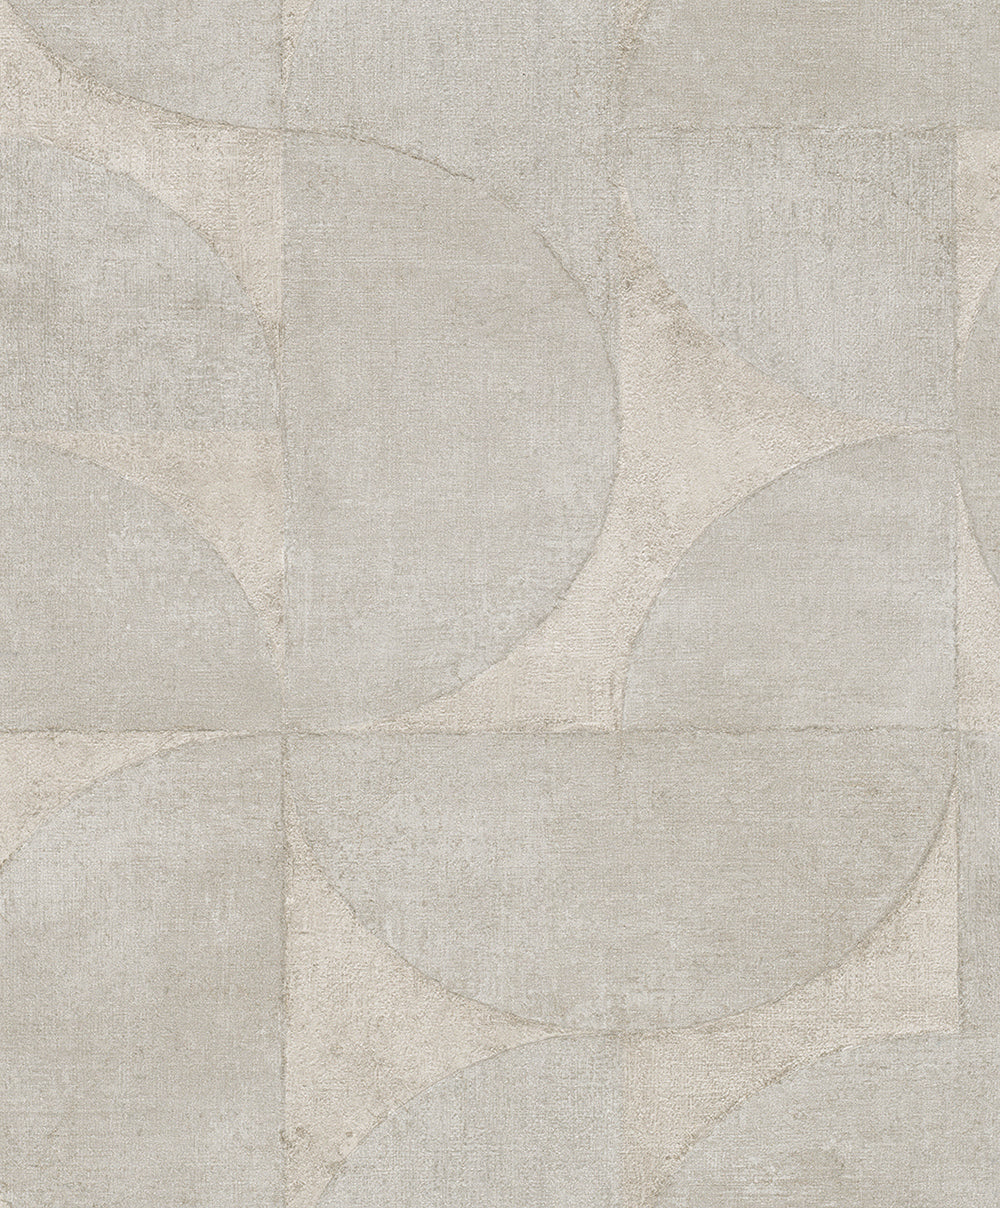 Vintage Deluxe - Concrete Circles geometric wallpaper Marburg Roll Light Taupe  32825